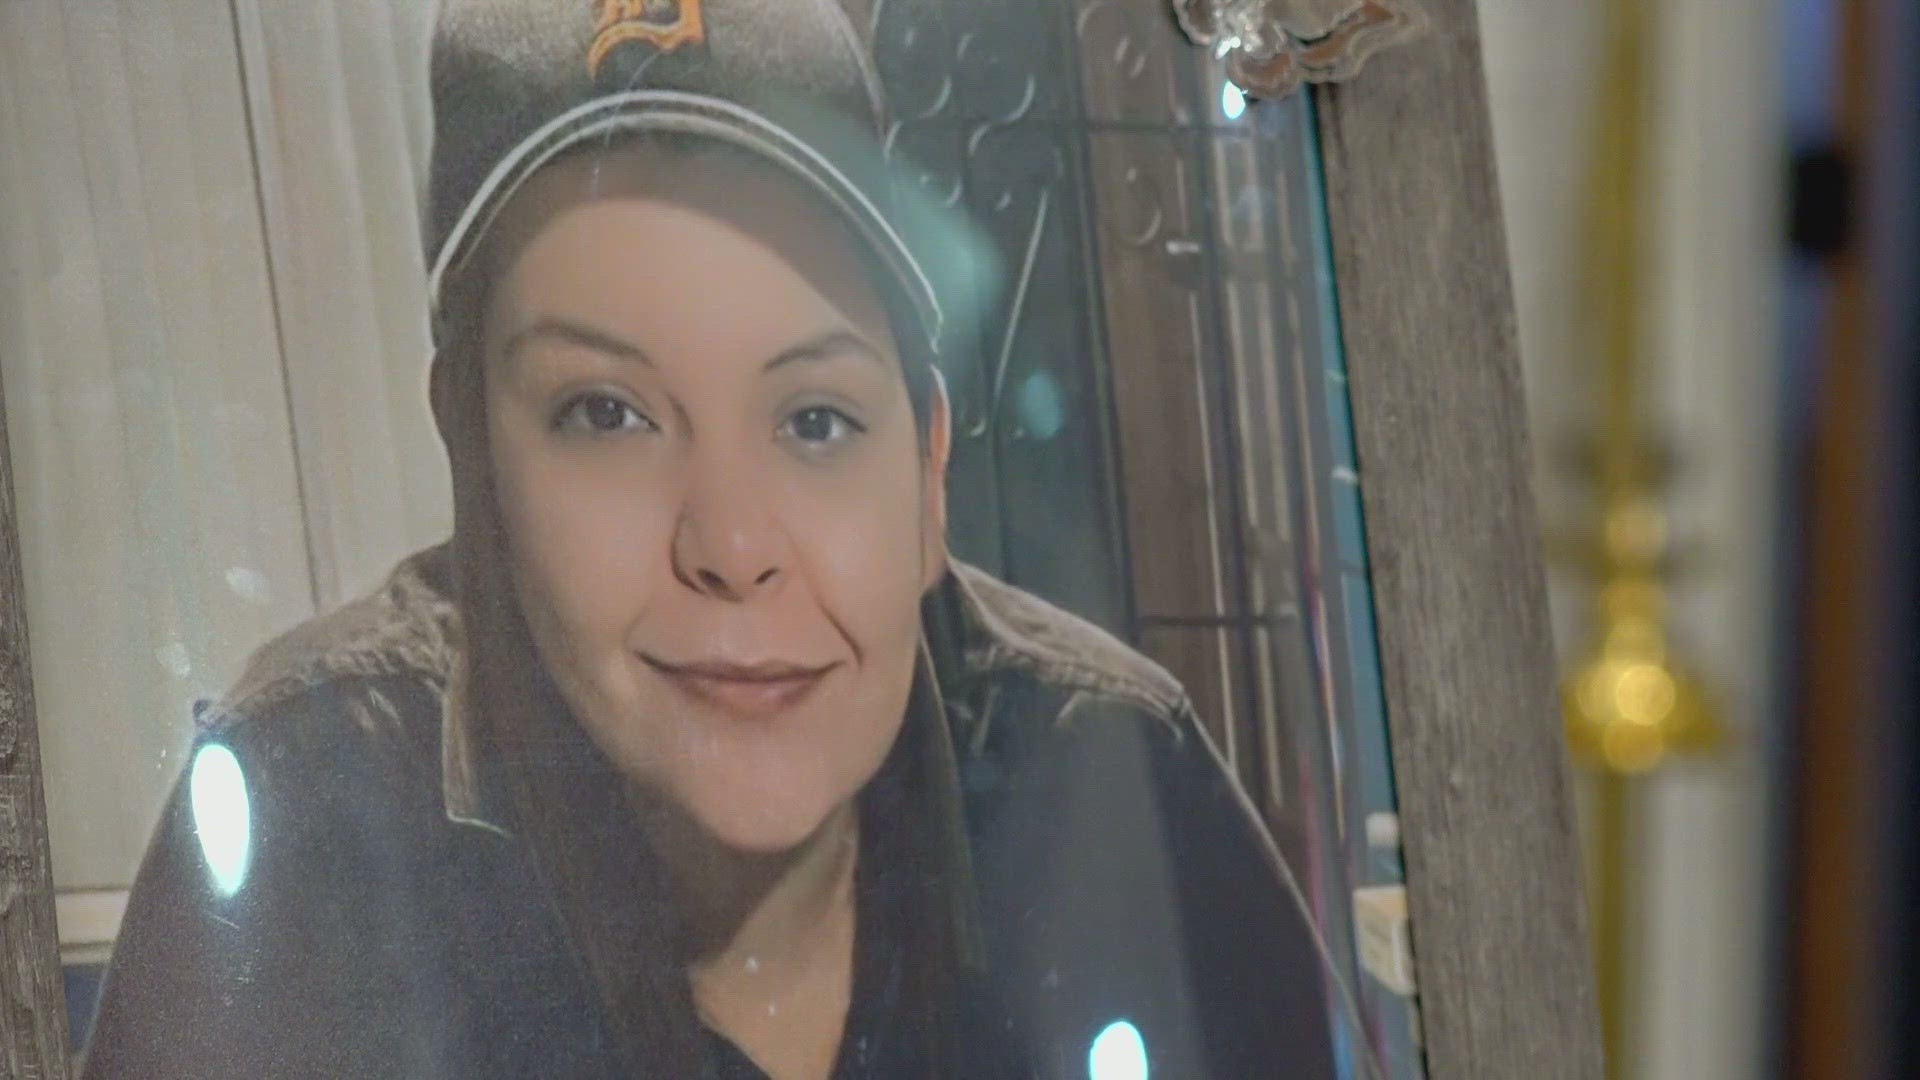 Family and friends came together to honor 25-year-old Irma Martinez who was shot and killed while on the job at a Glendale gas station last month.